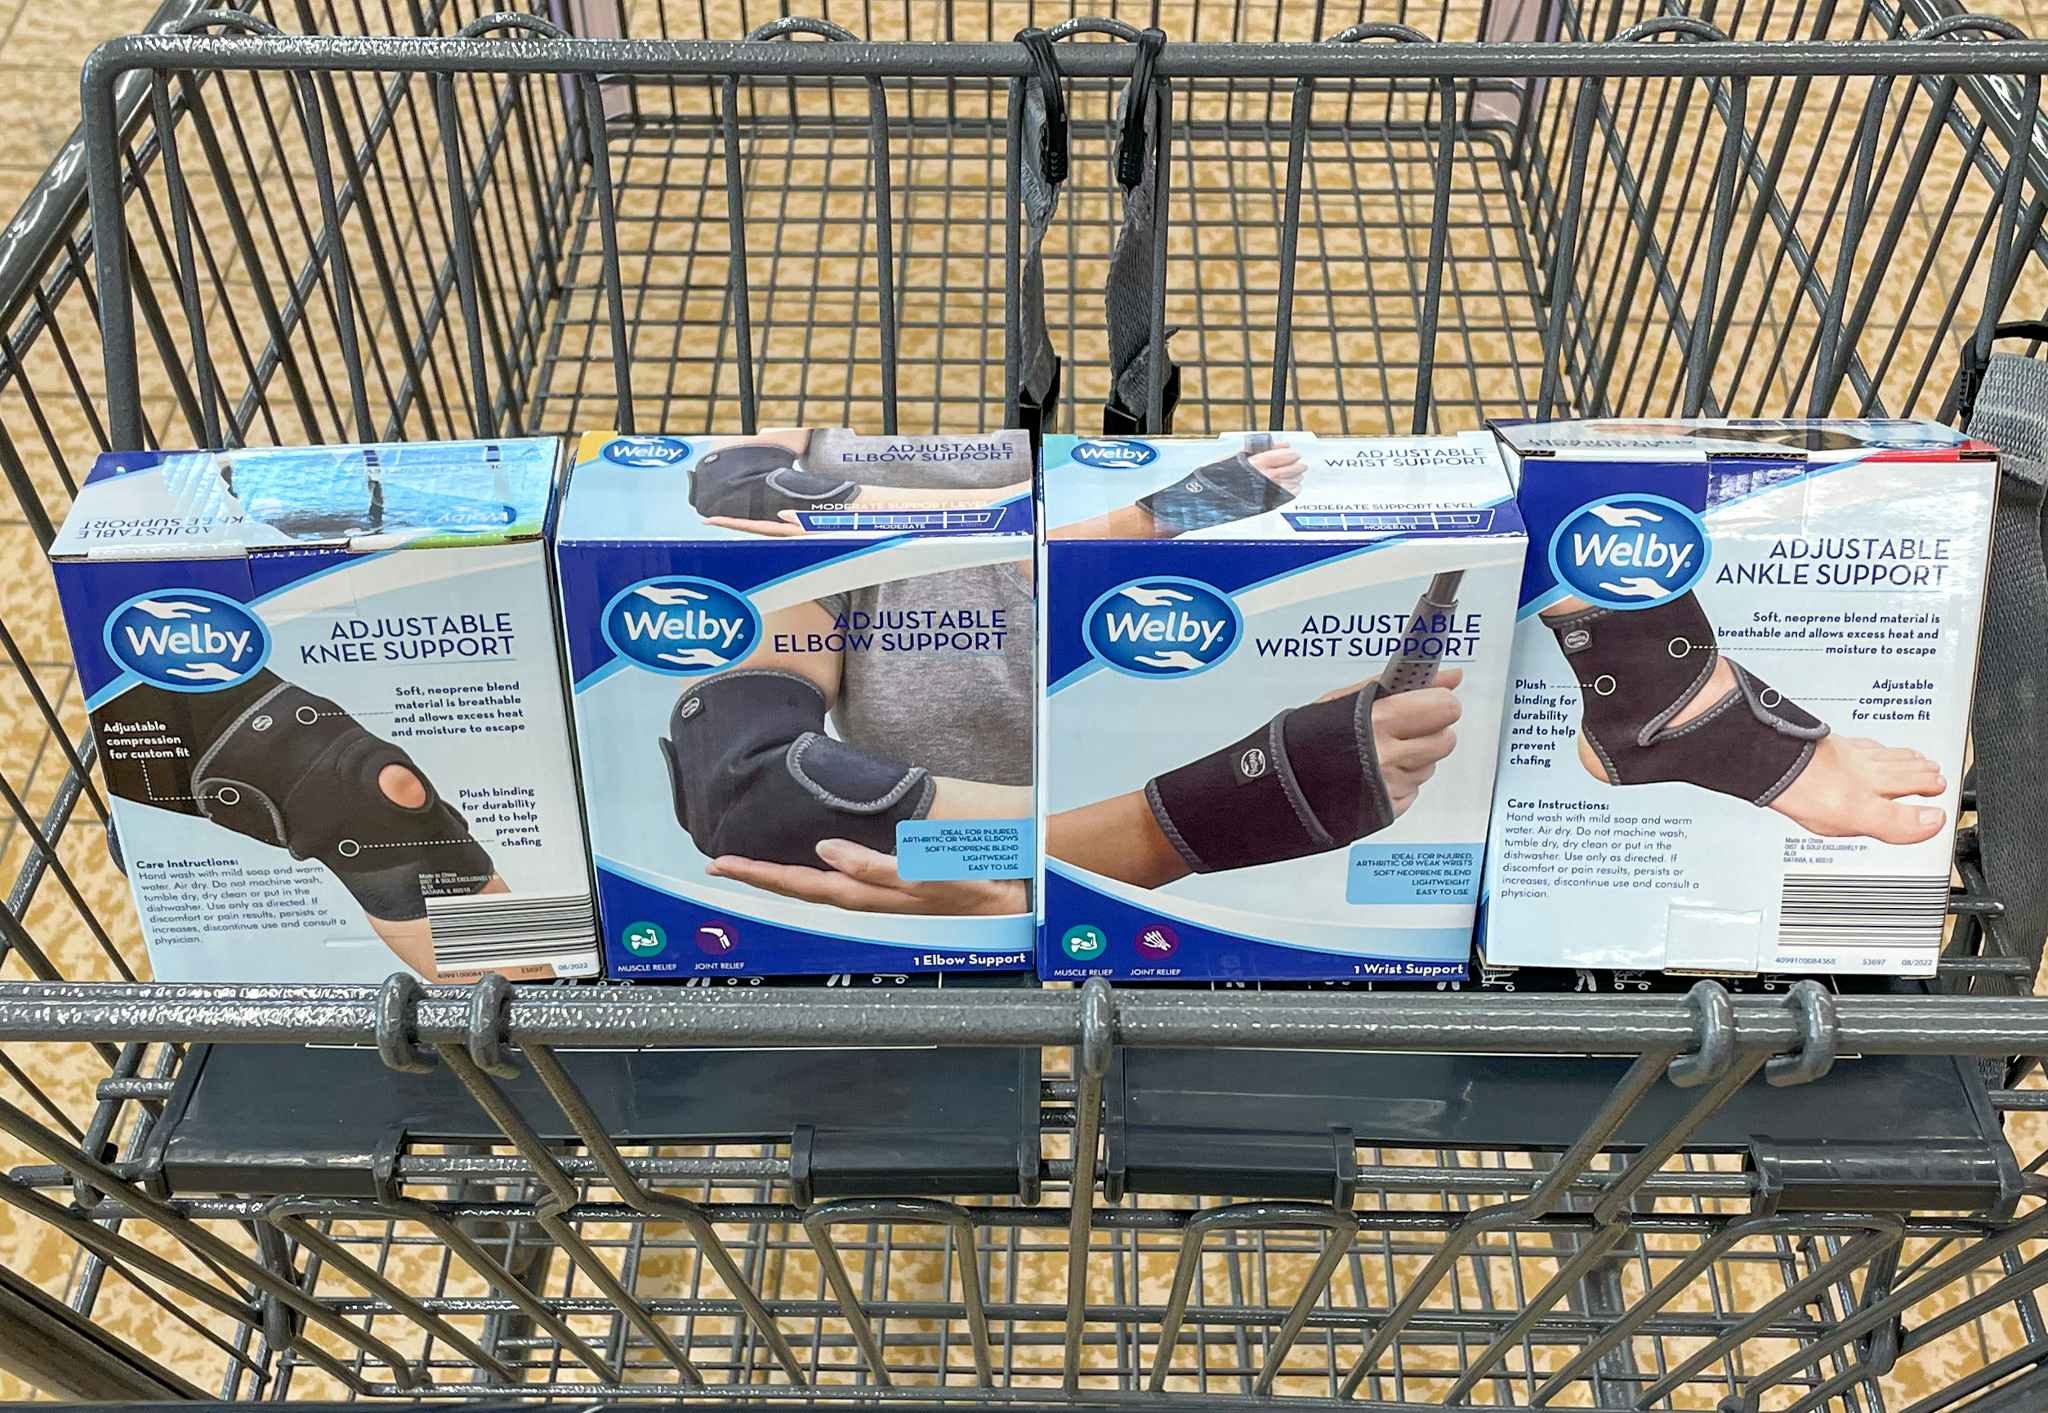 joint support braces in a cart at aldi